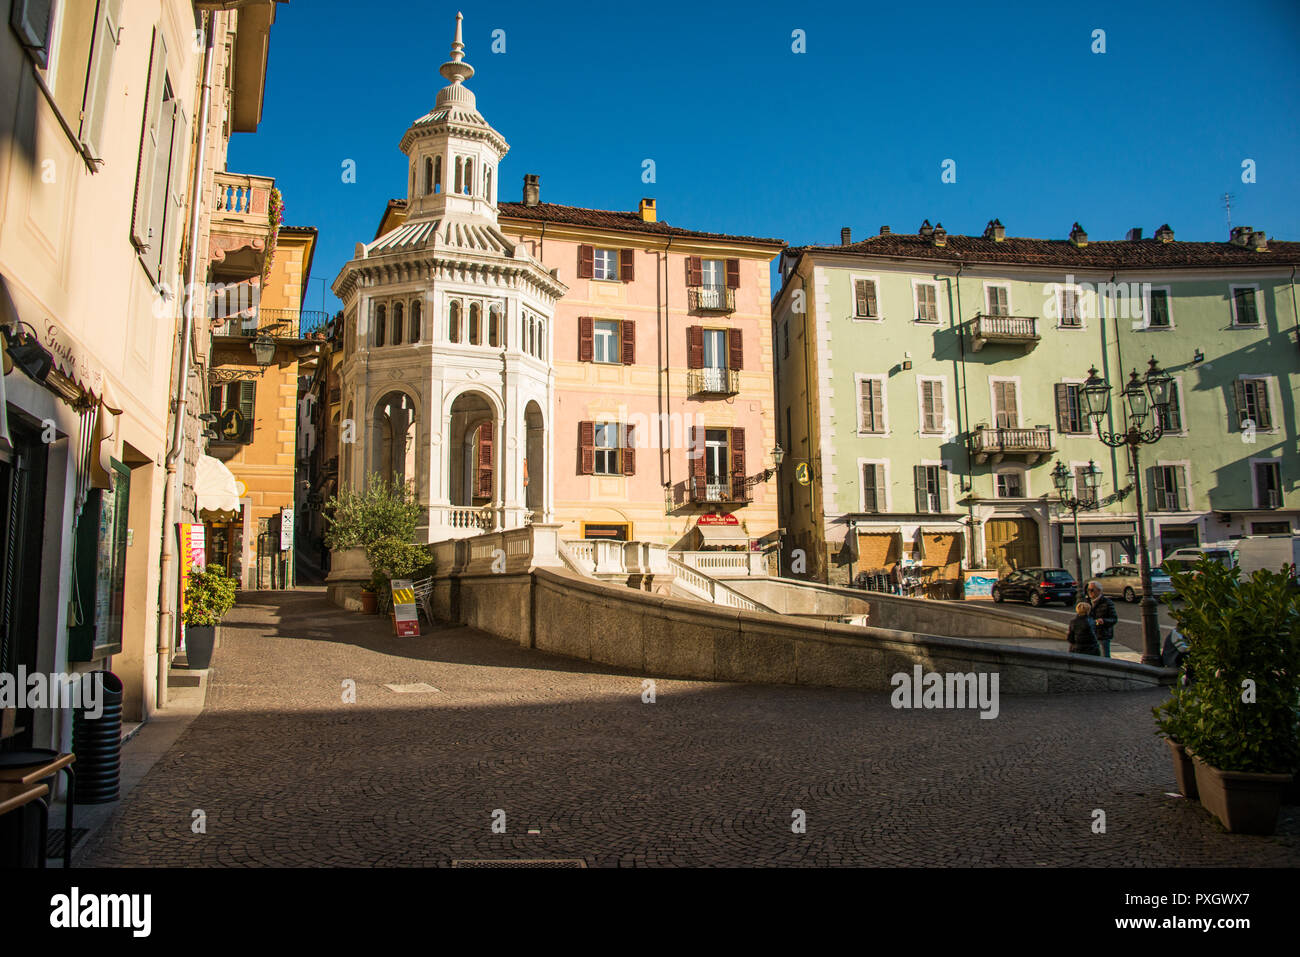 The small town of Acqui Terme in Piedmont, Italy known for its hot springs Stock Photo